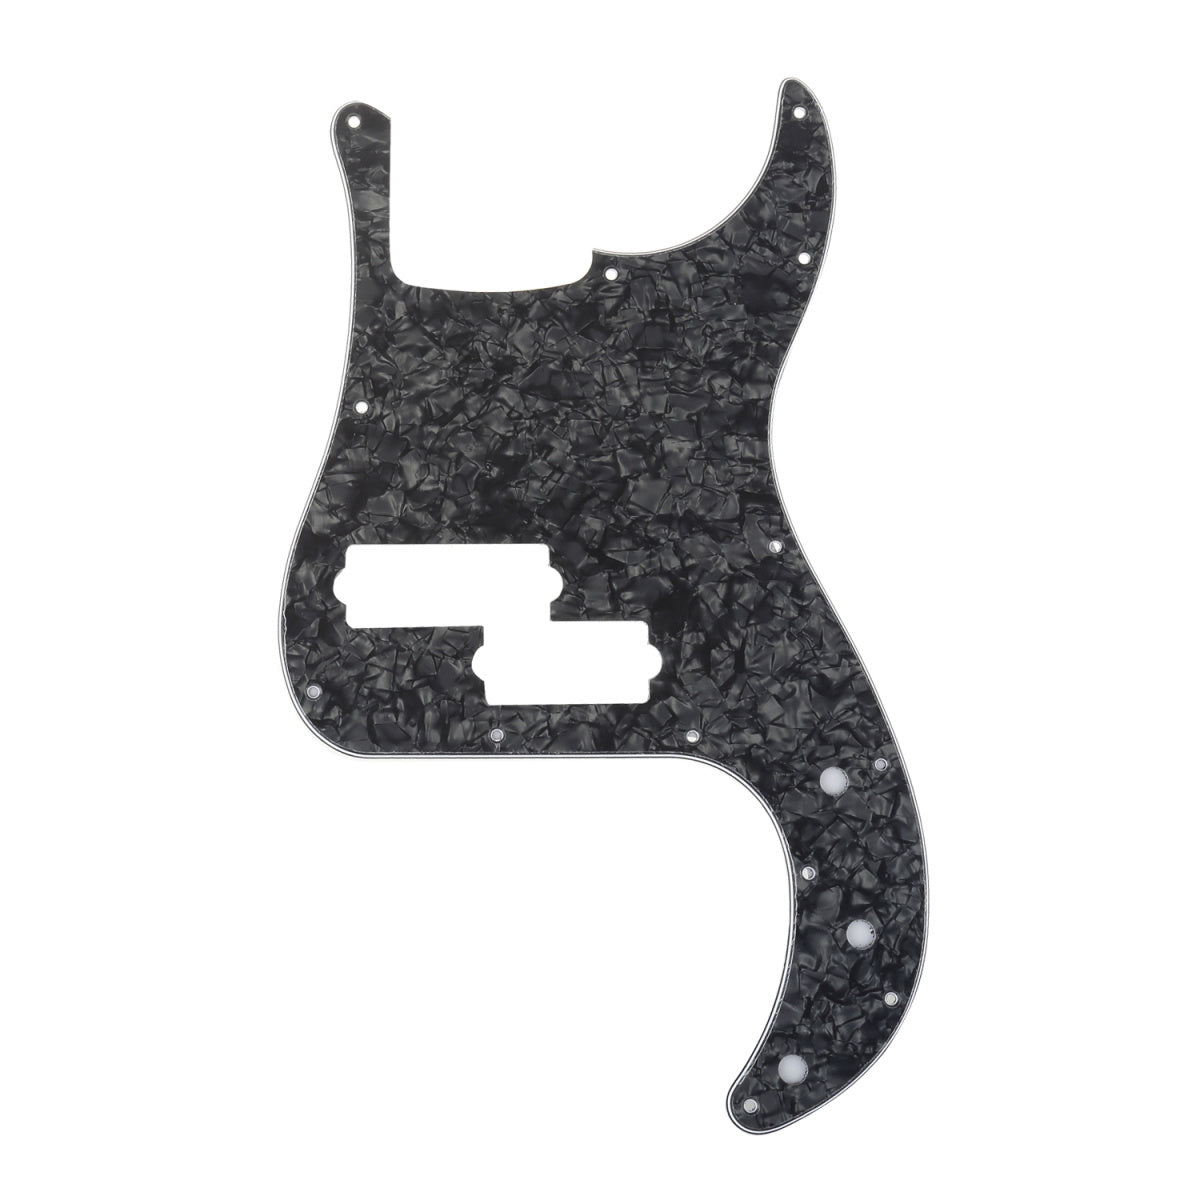 Musiclily Pro 13-Hole Contemporary P Bass Pickguard for Fender Precision Bass Mexican 5-String, 4Ply Black Pearl